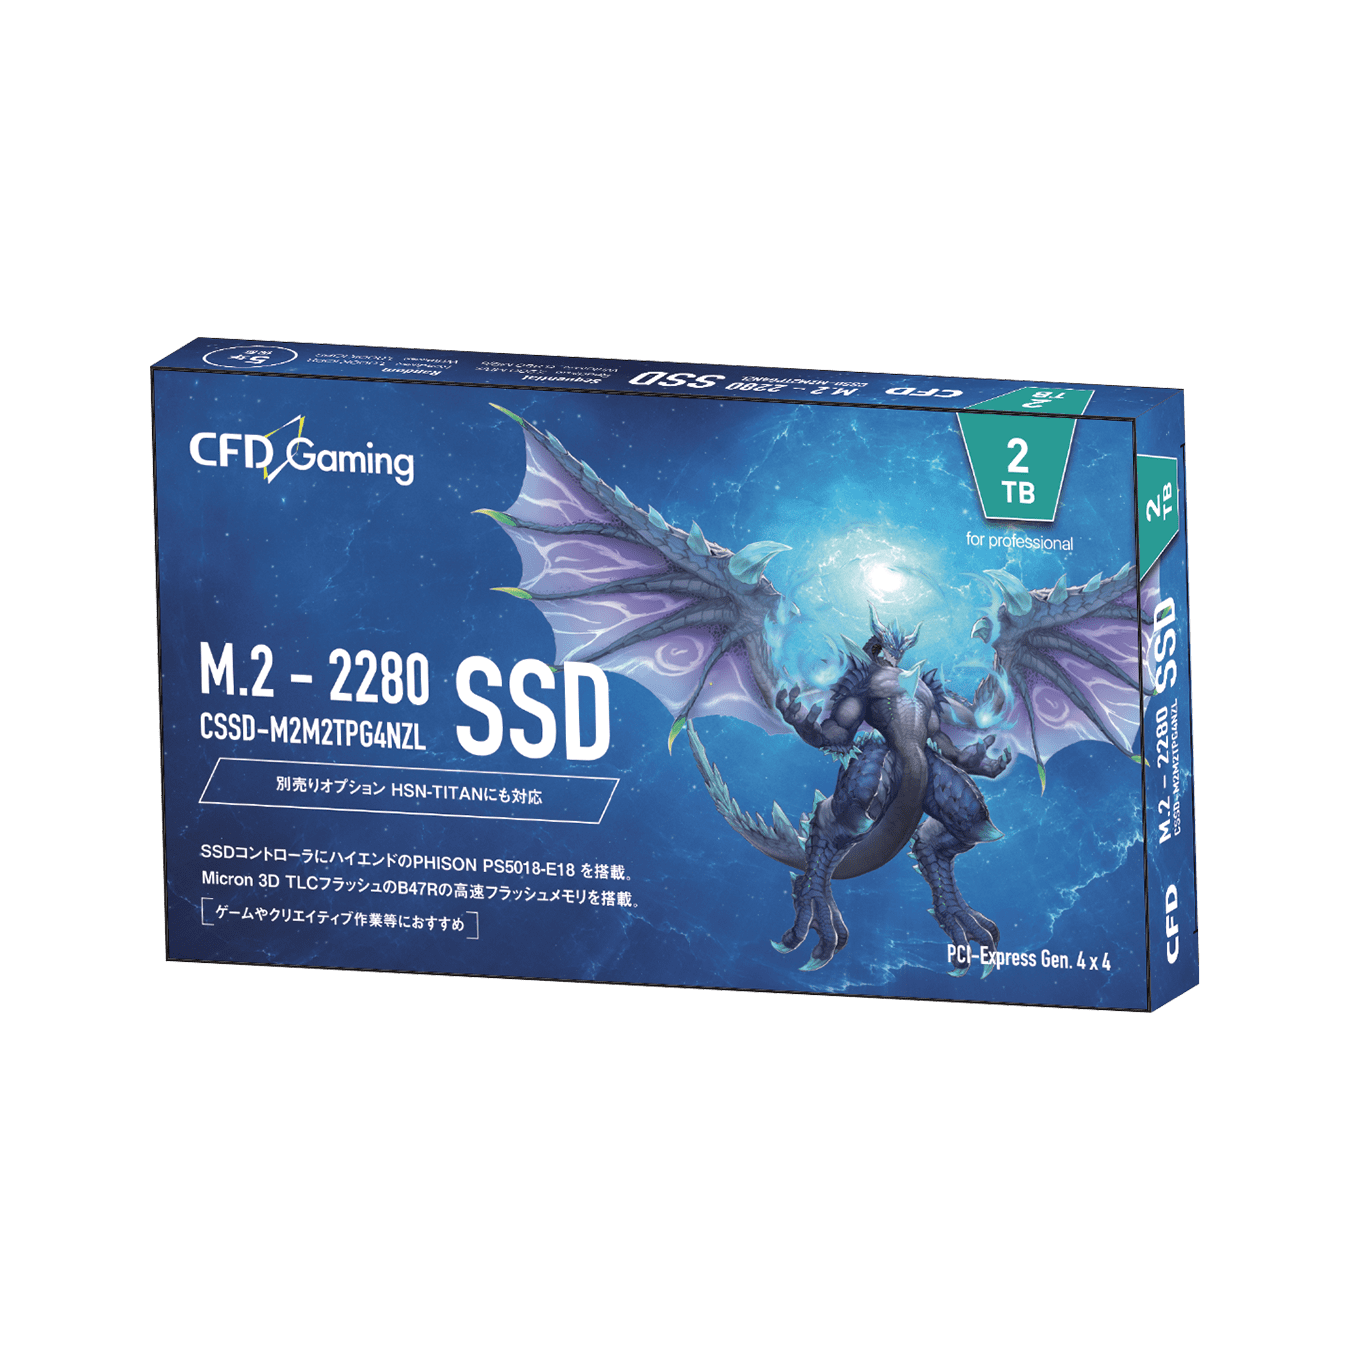 CFD Gamingモデル SSD 2TB　2点セット